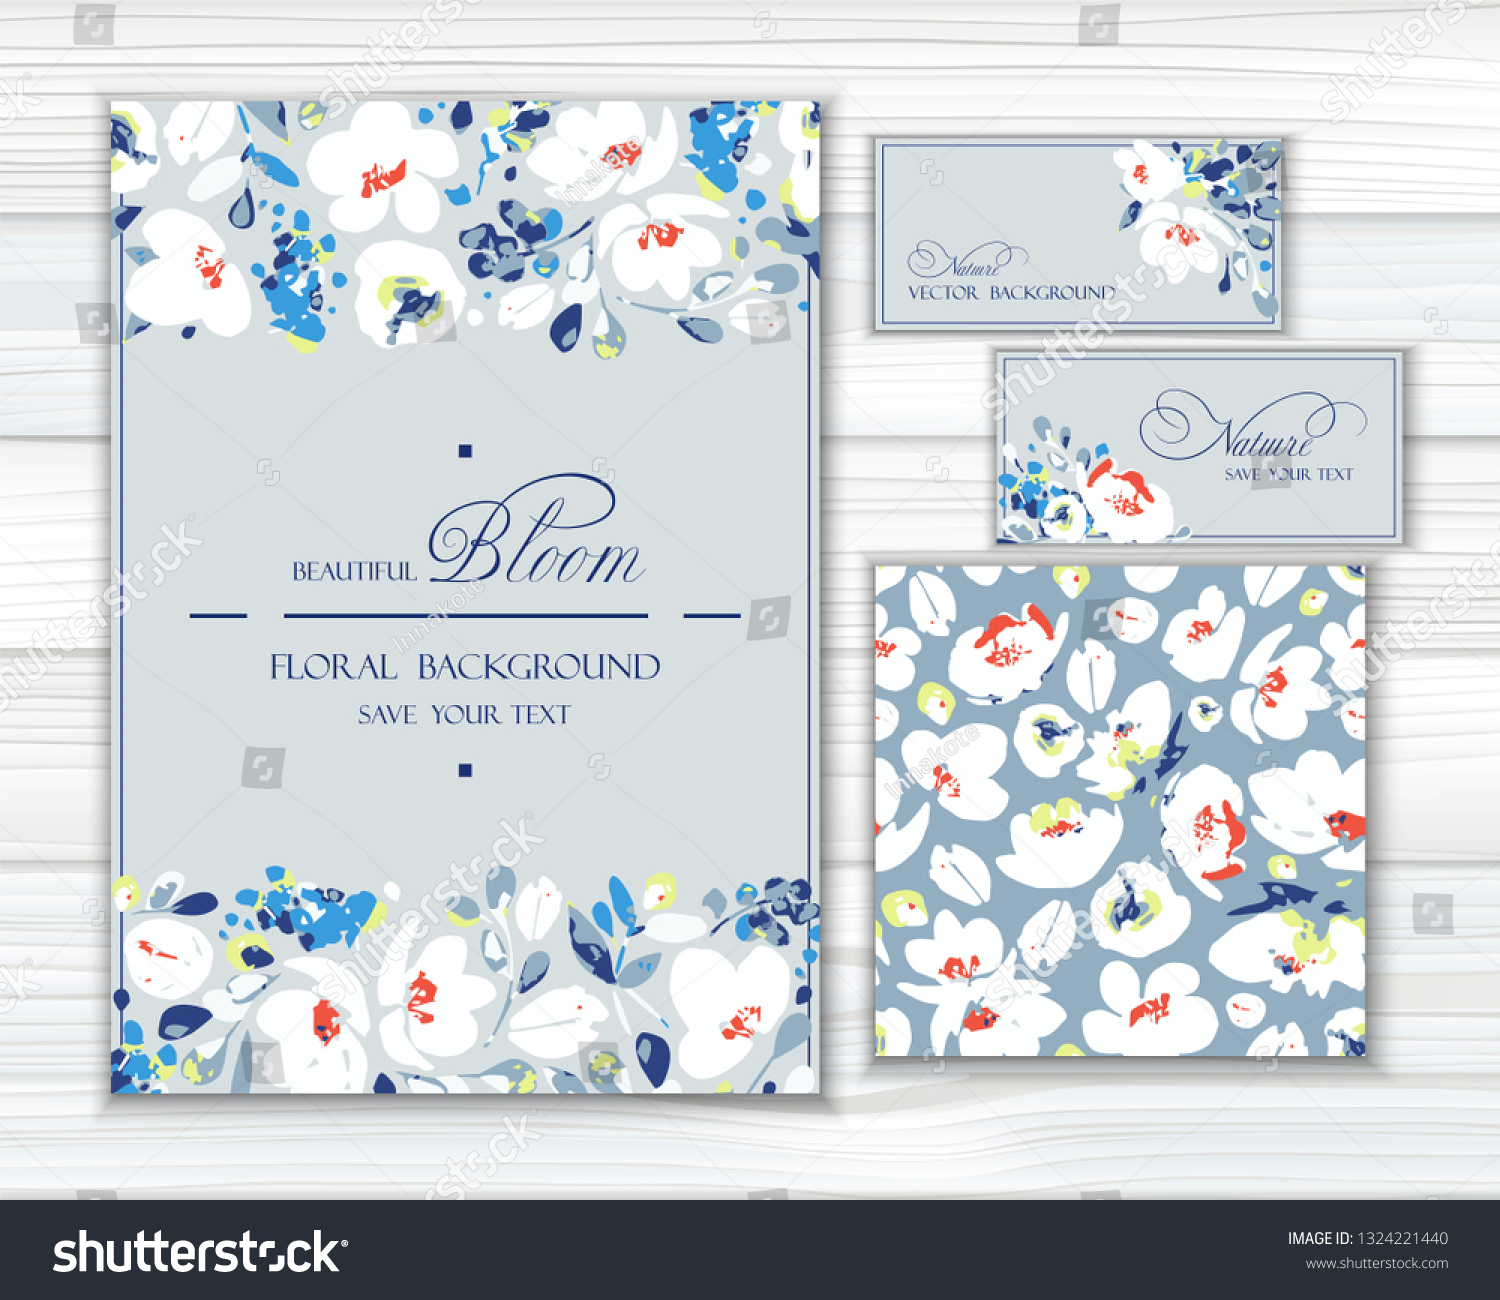 SVG of Set of vector backgrounds for greetings or invitations  with lovely abstract white flowers,  shapes and spots  in light gray colors. Greeting templates and seamless pattern with gentle blooming. svg